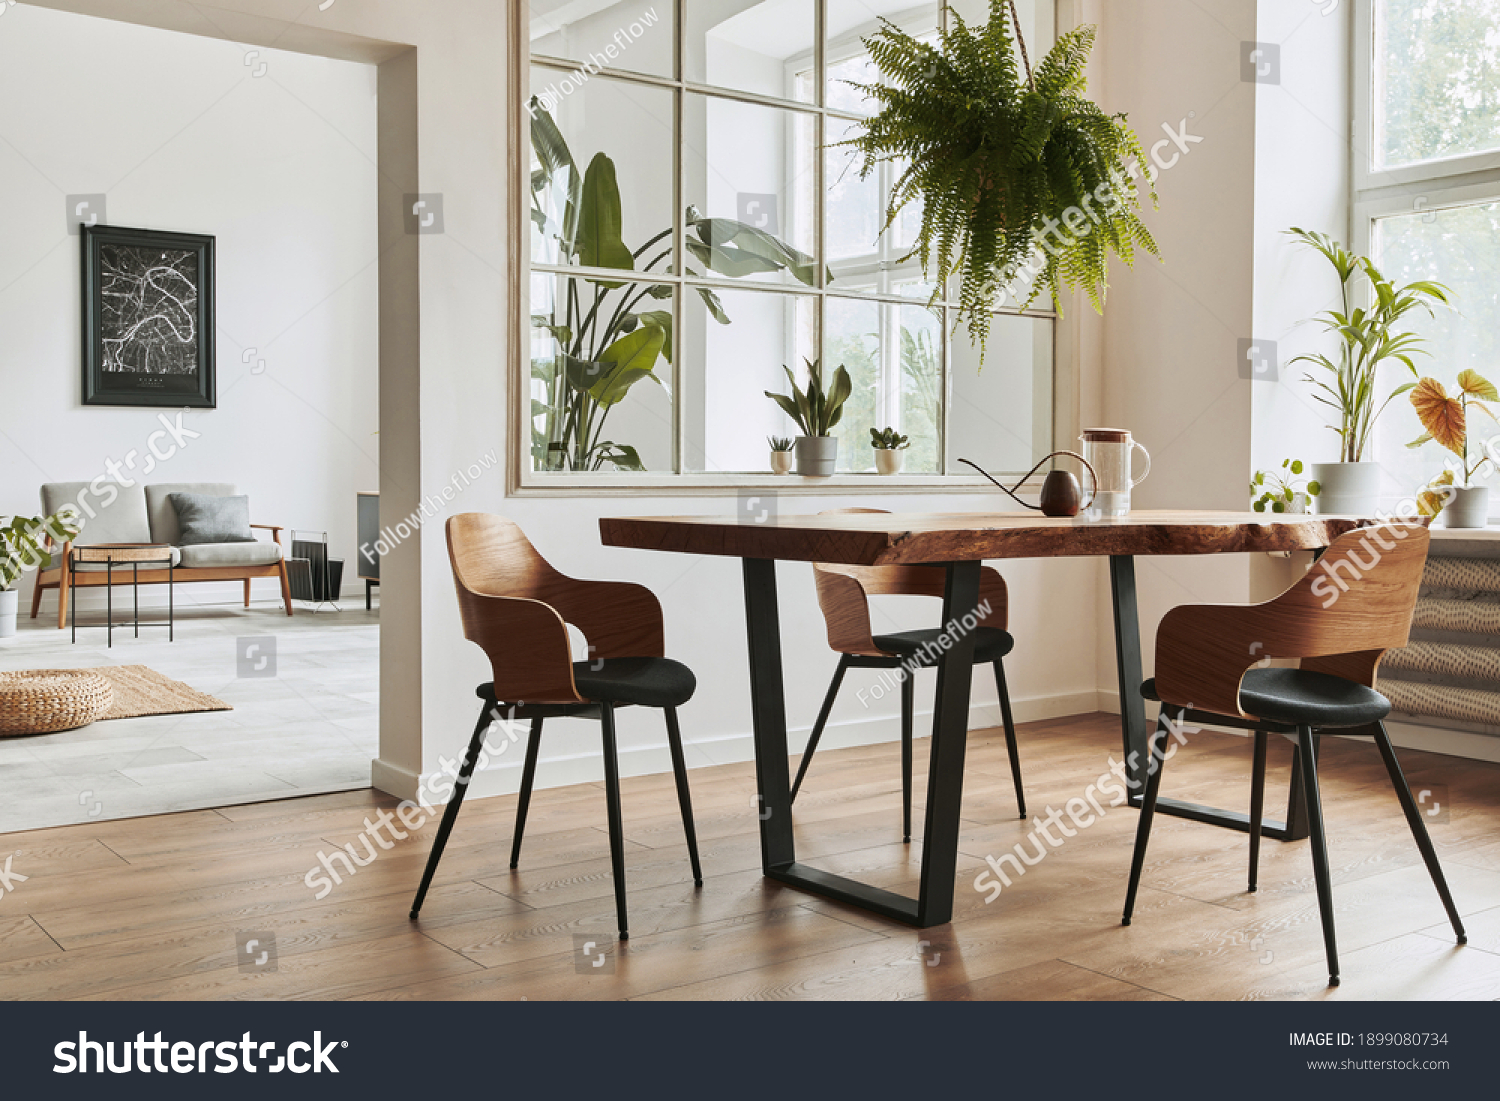 Stylish and botany interior of dining room with design craft wooden table, chairs, furniture, a lof of plants, window, poster map and elegant accessories in modern home decor. Template. #1899080734